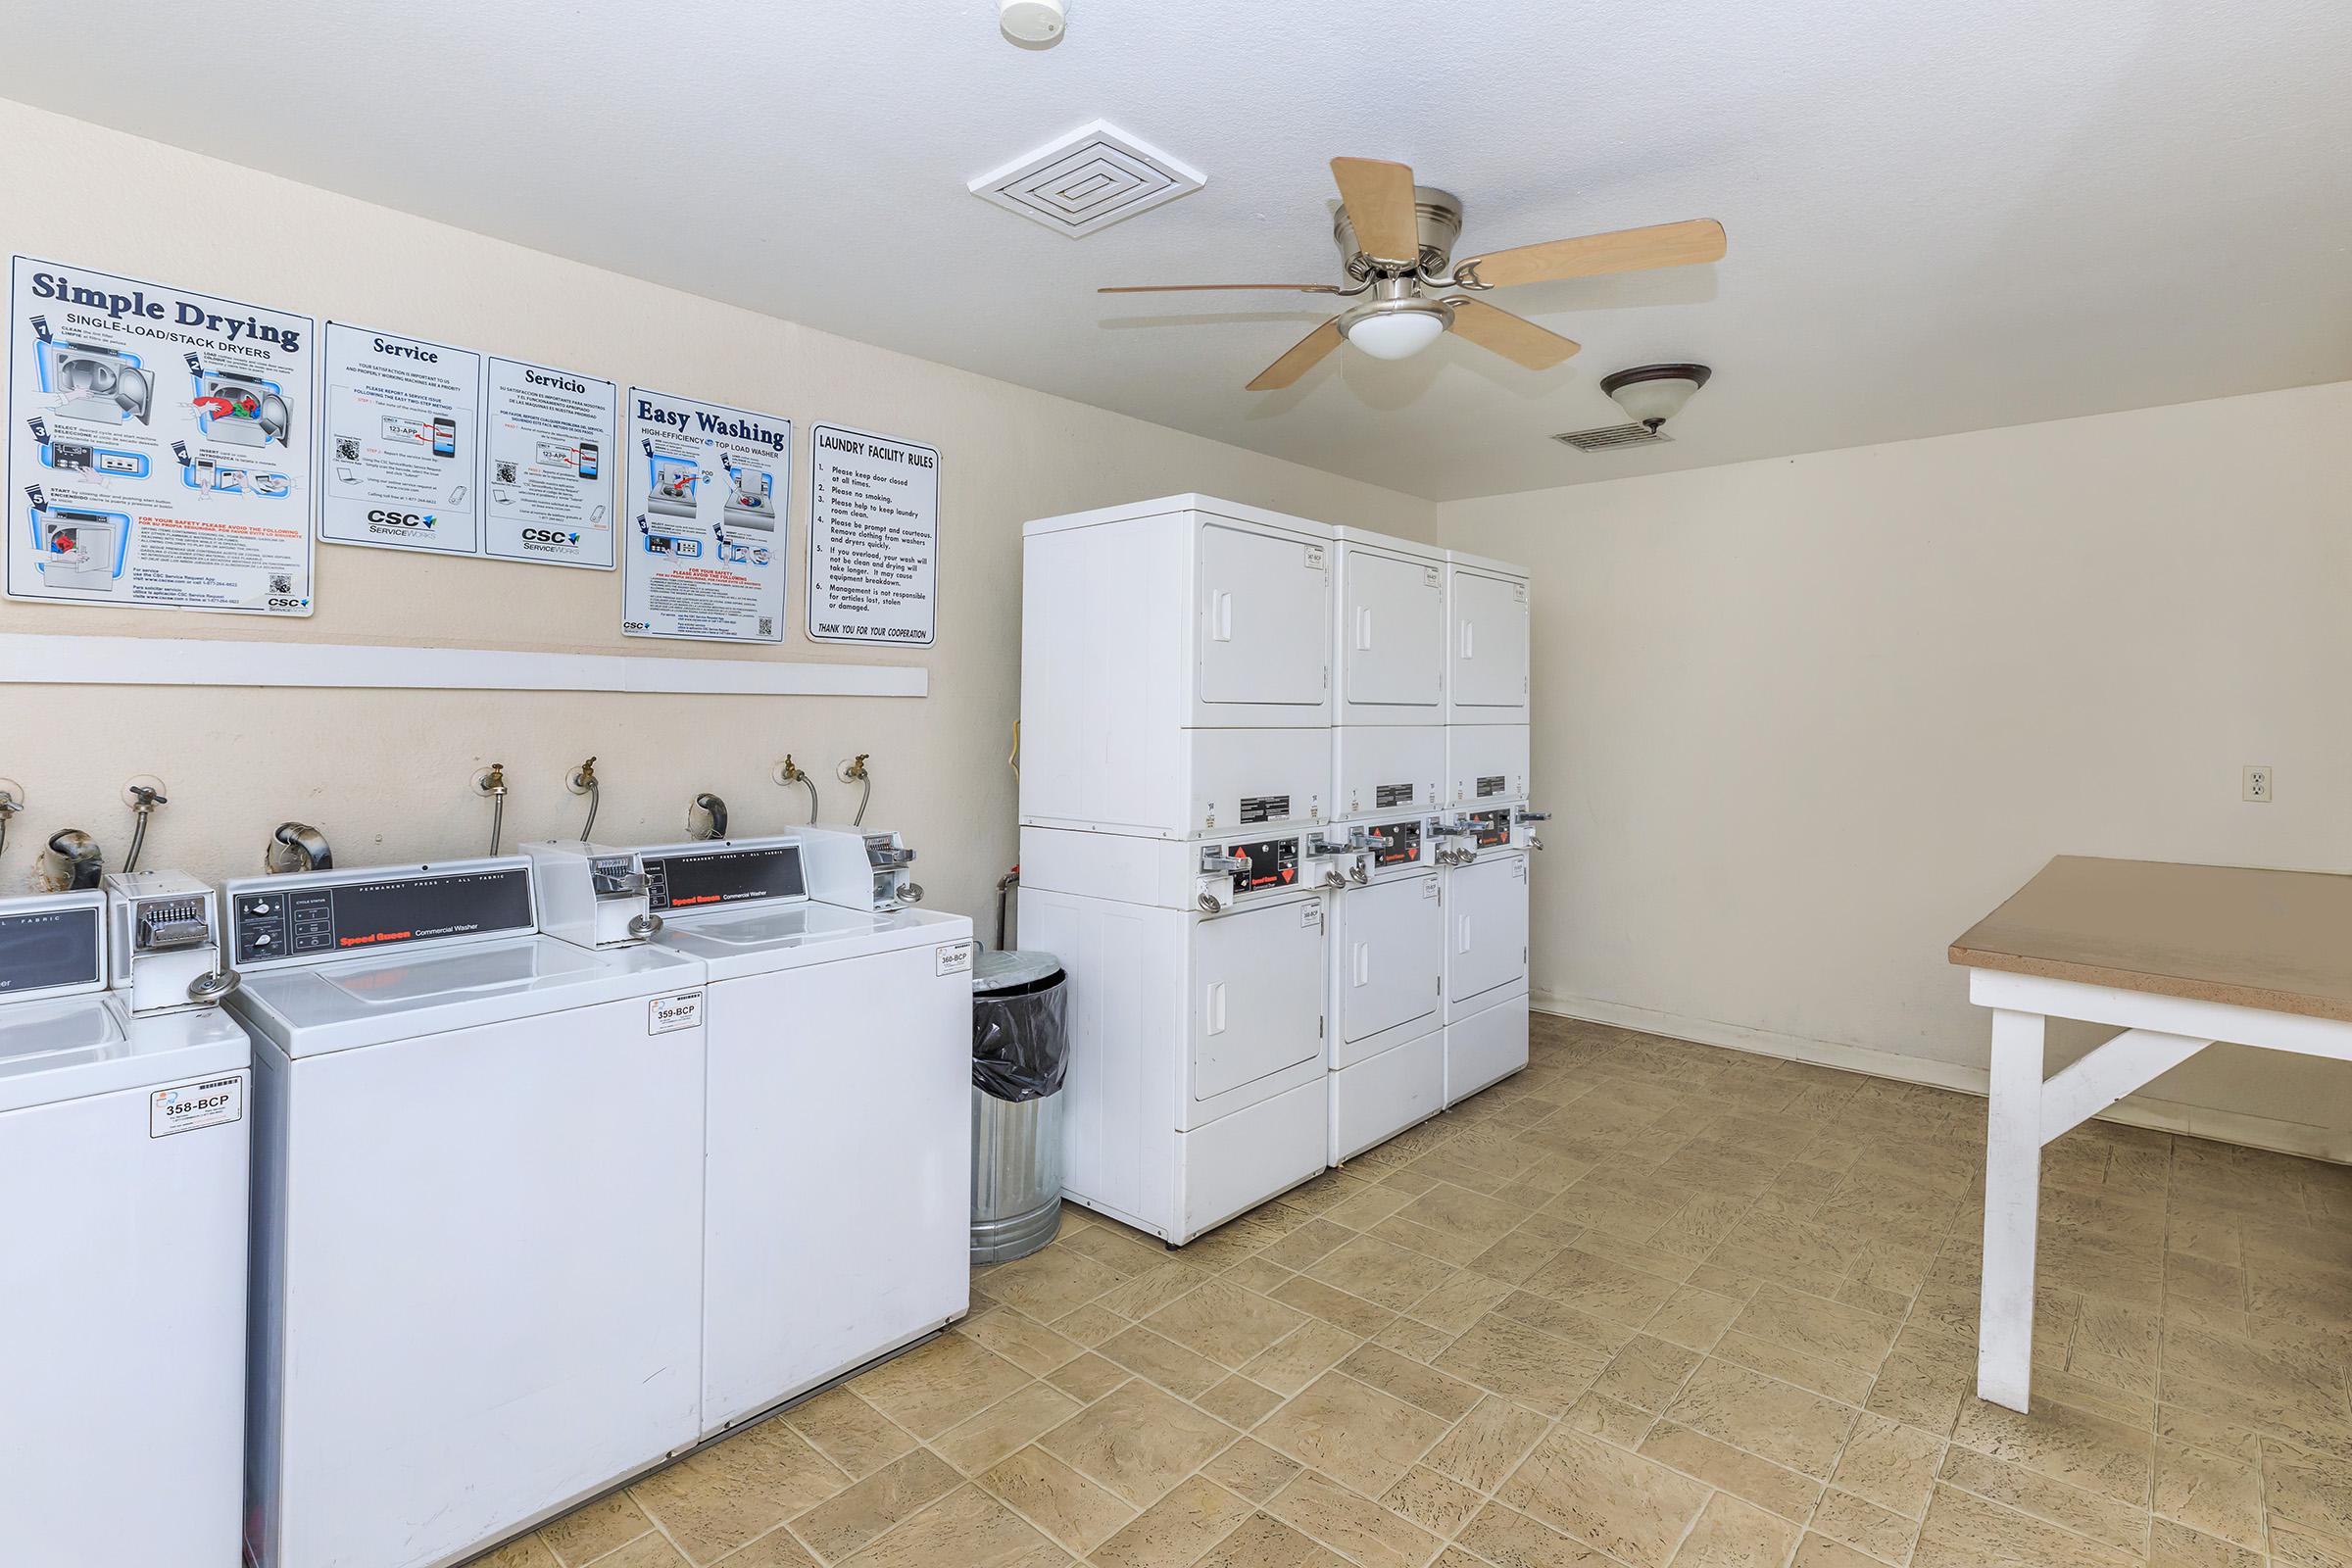 Washers and Dryers with community laundry room